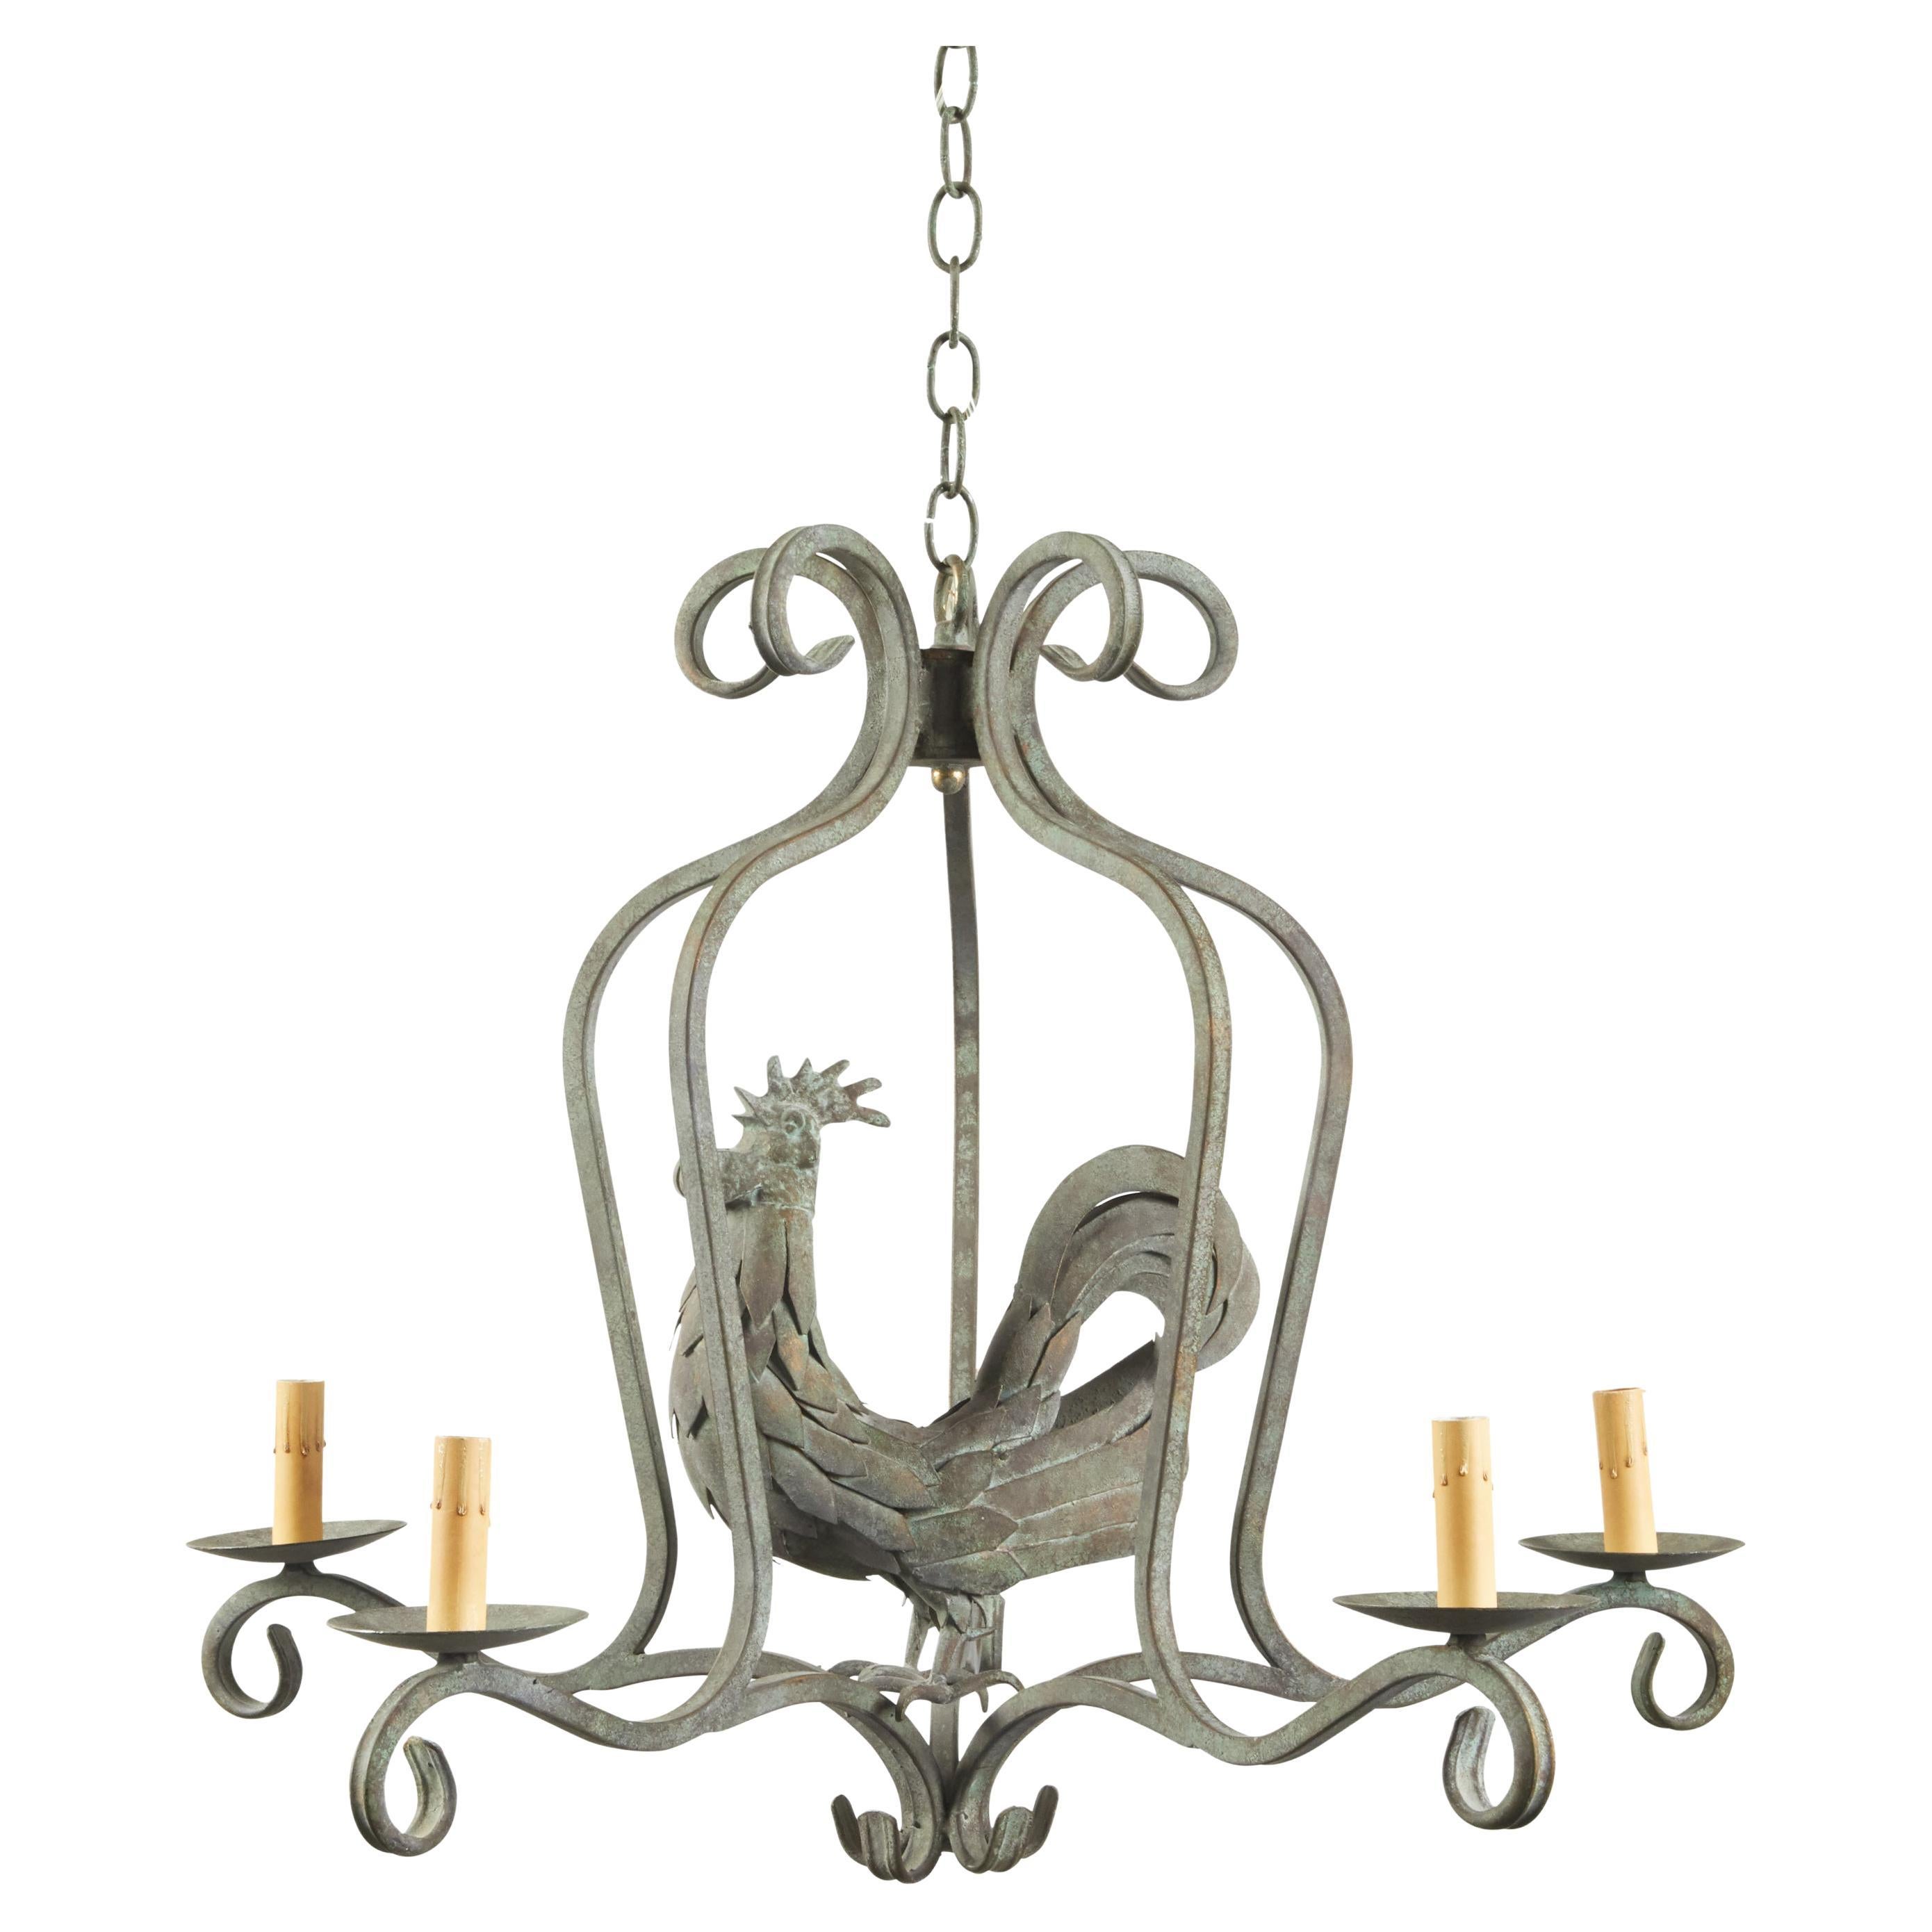 French Midcentury Metal Rooster Five-Light Chandelier with Verdigris Patina